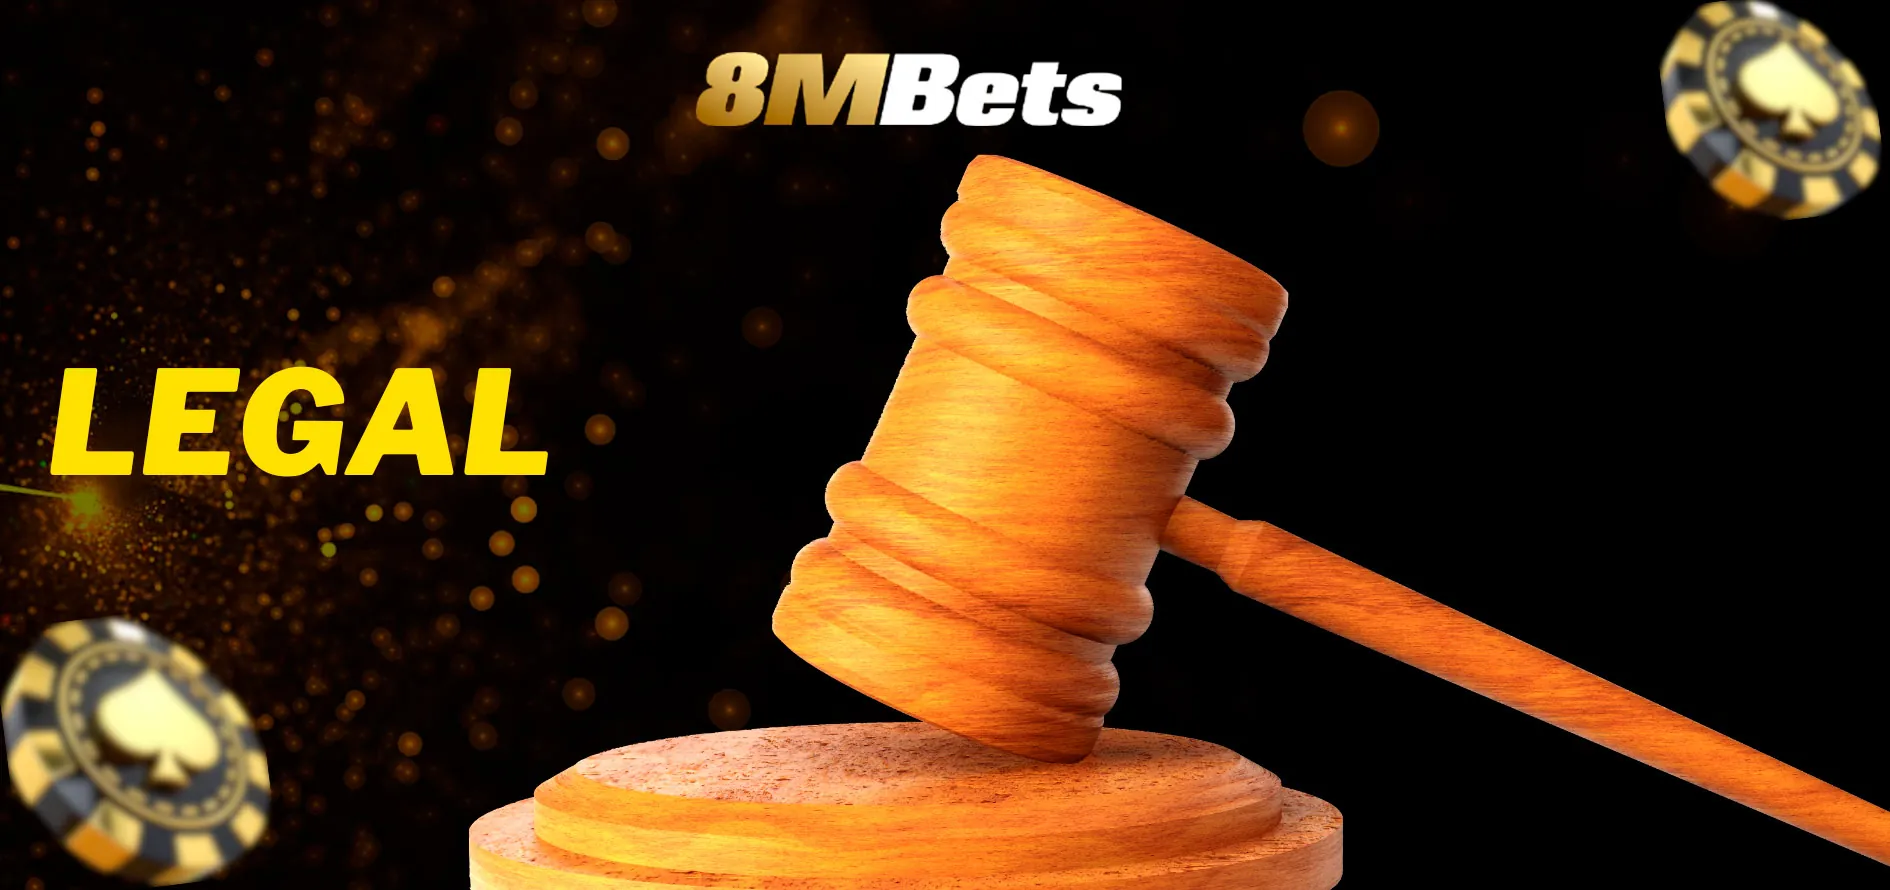 Discover the legality of 8mbets in Bangladesh